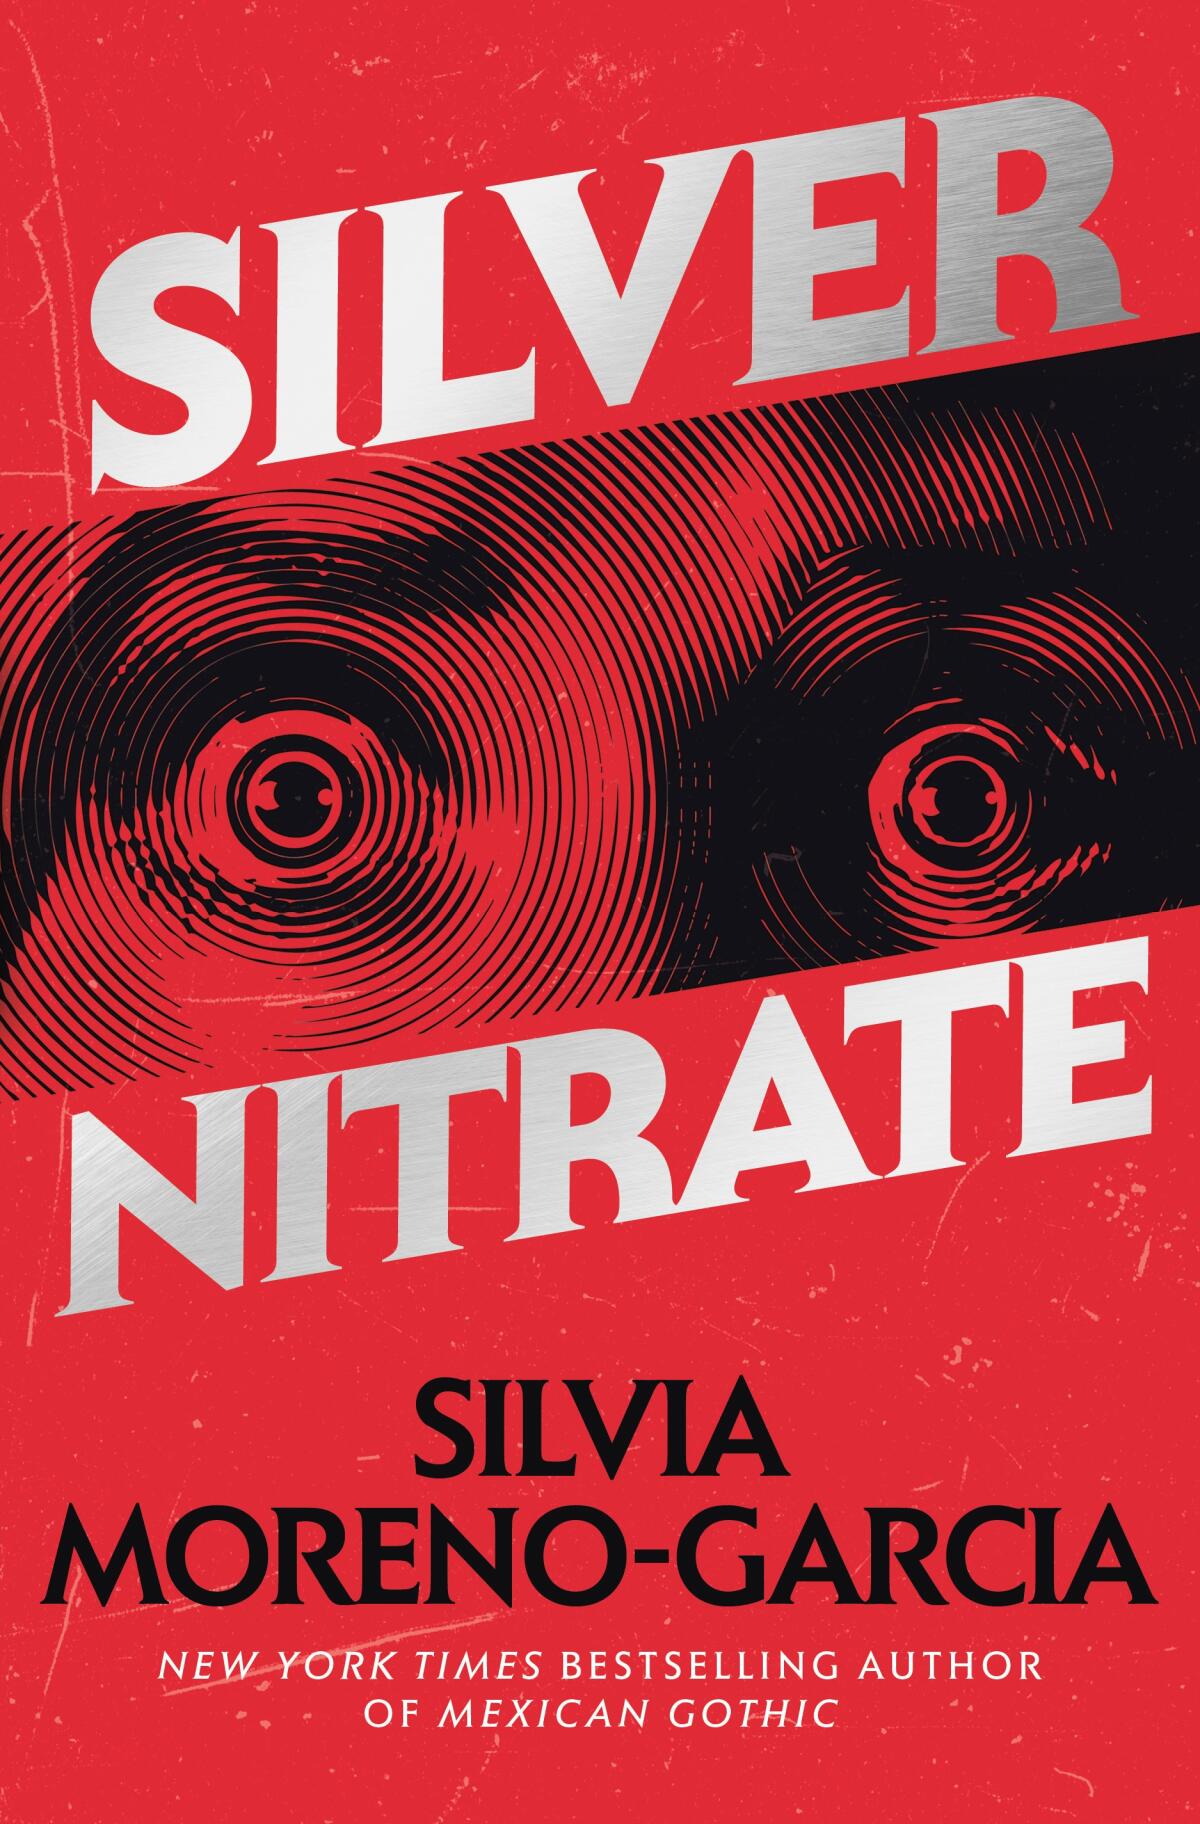 book cover for 'Silver Nitrate' by Silvia Moreno-Garcia features eyes wide open on red frontground